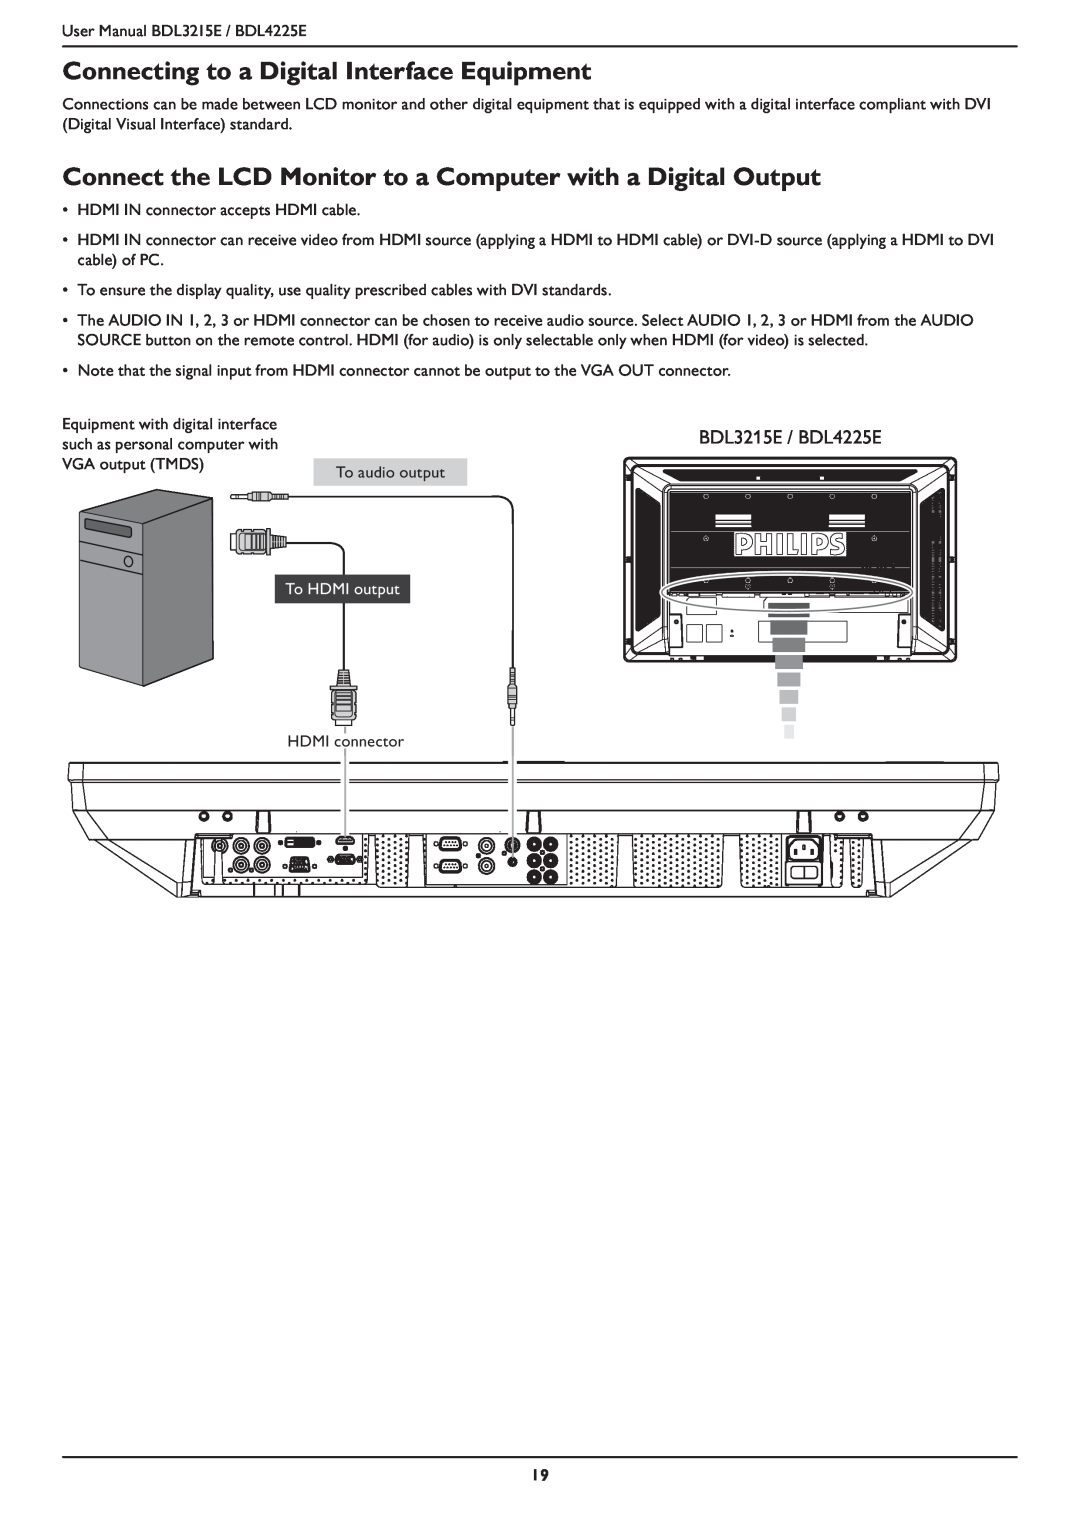 Philips BDL4225E, BDL3215E user manual Connecting to a Digital Interface Equipment, To HDMI output 